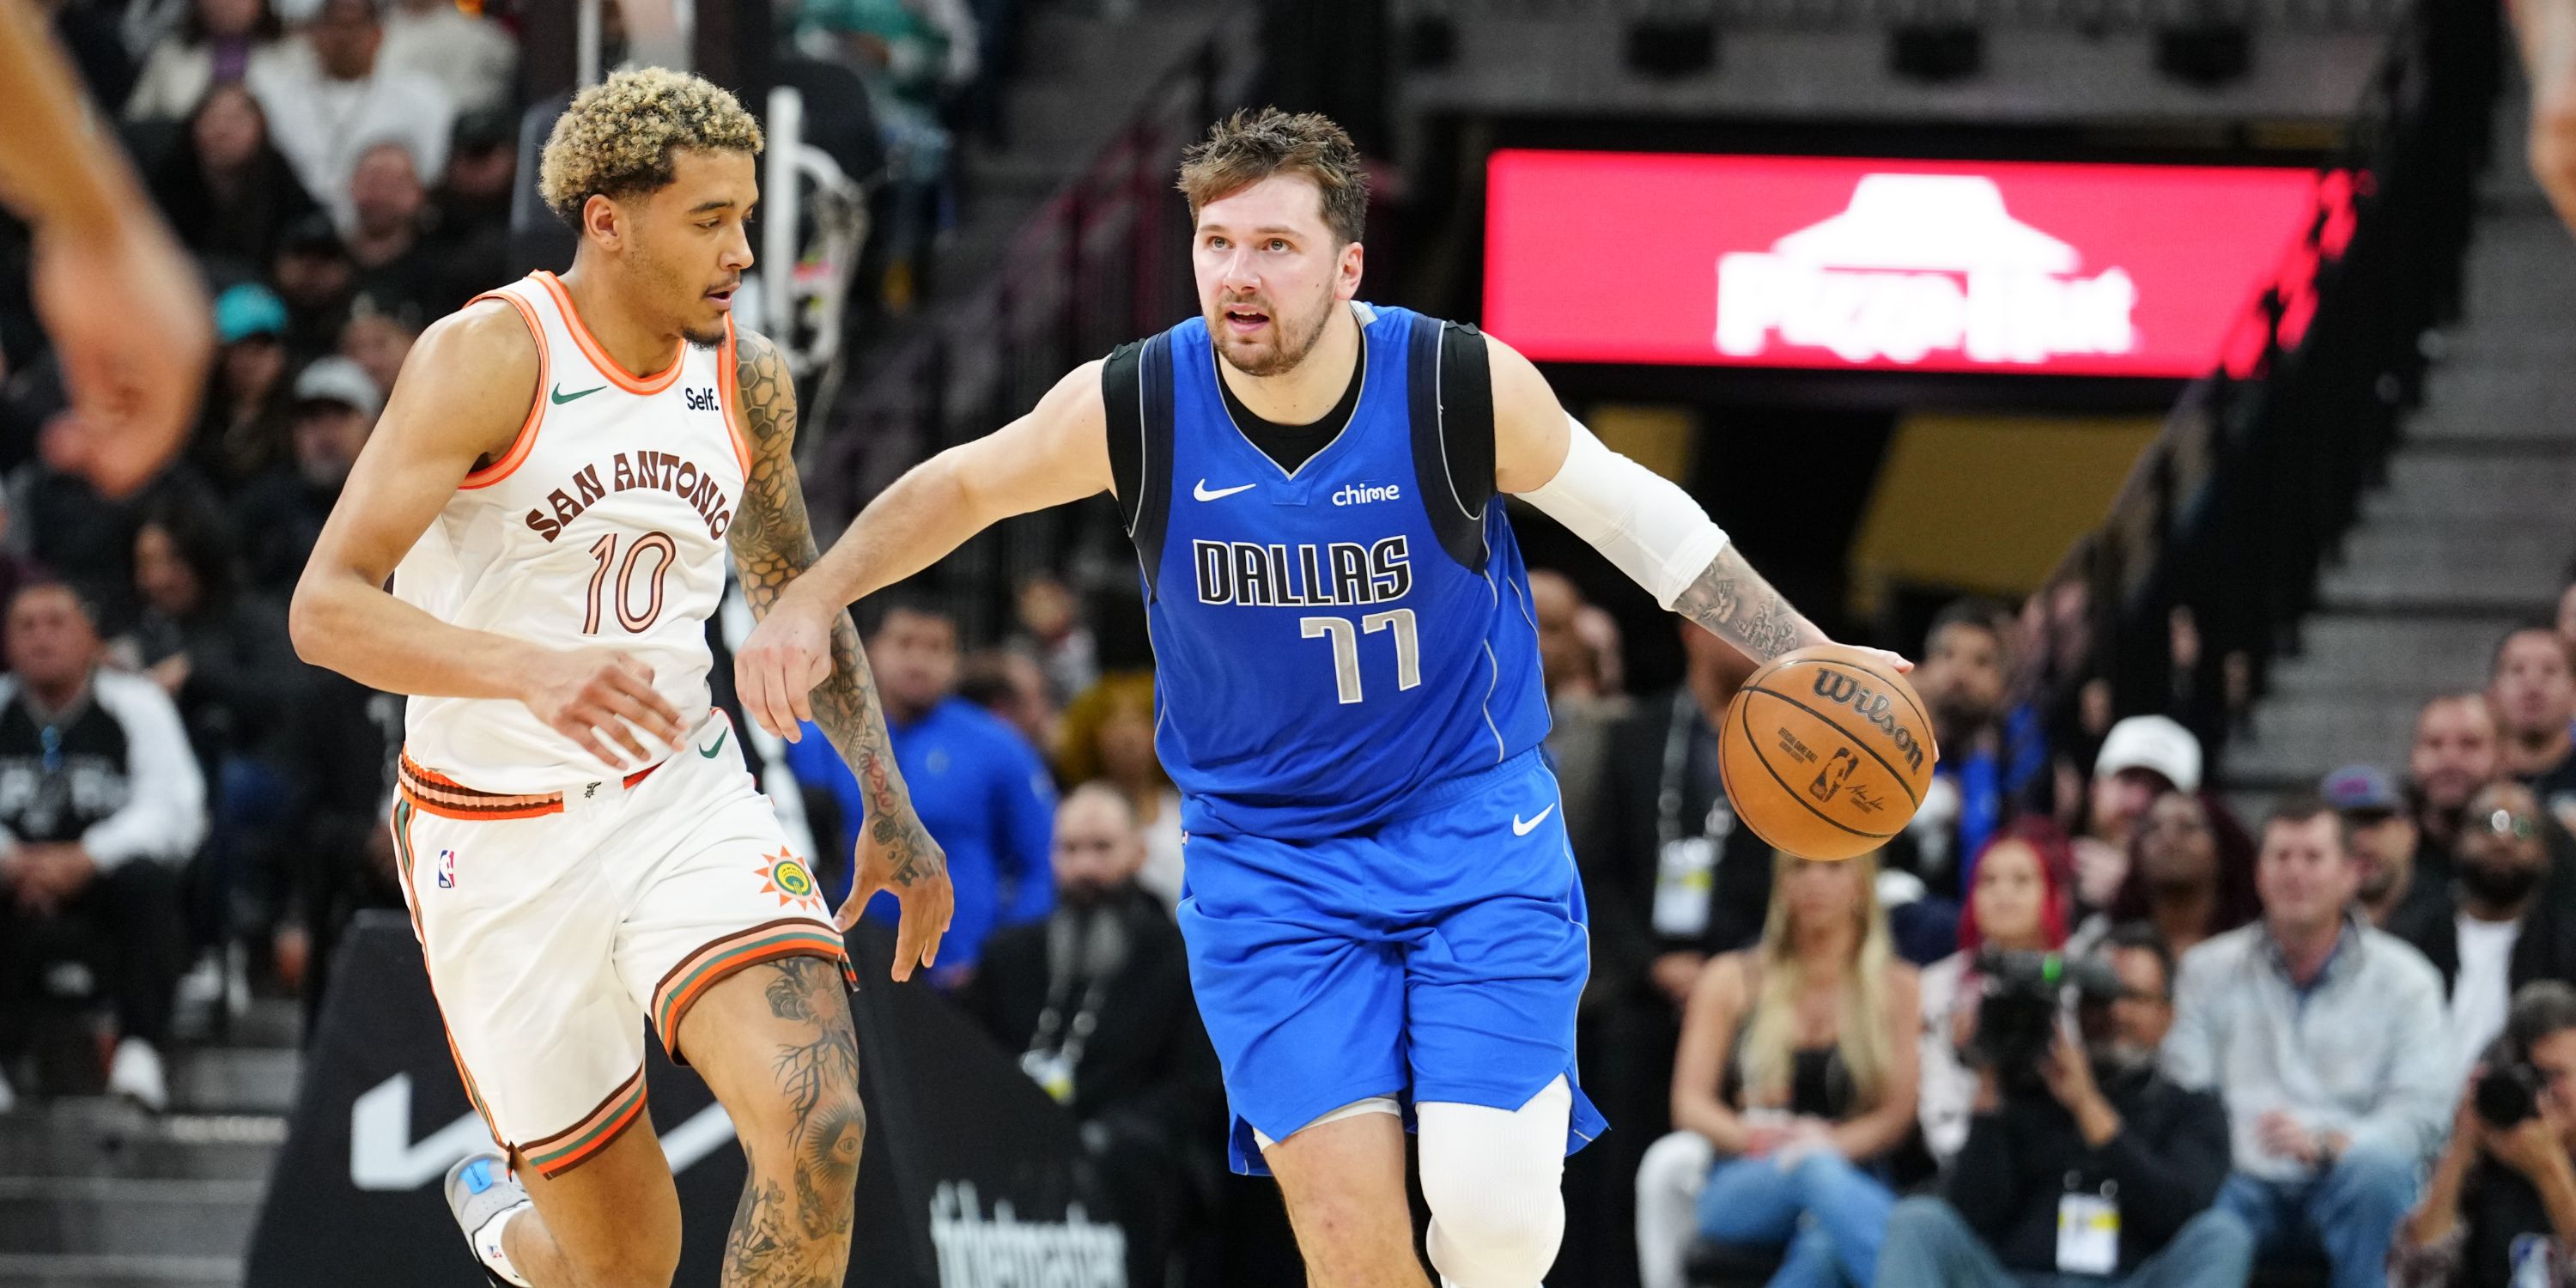 Luka Doncic's Mavs Pull Away Late for Blowout Win Over Sixers in